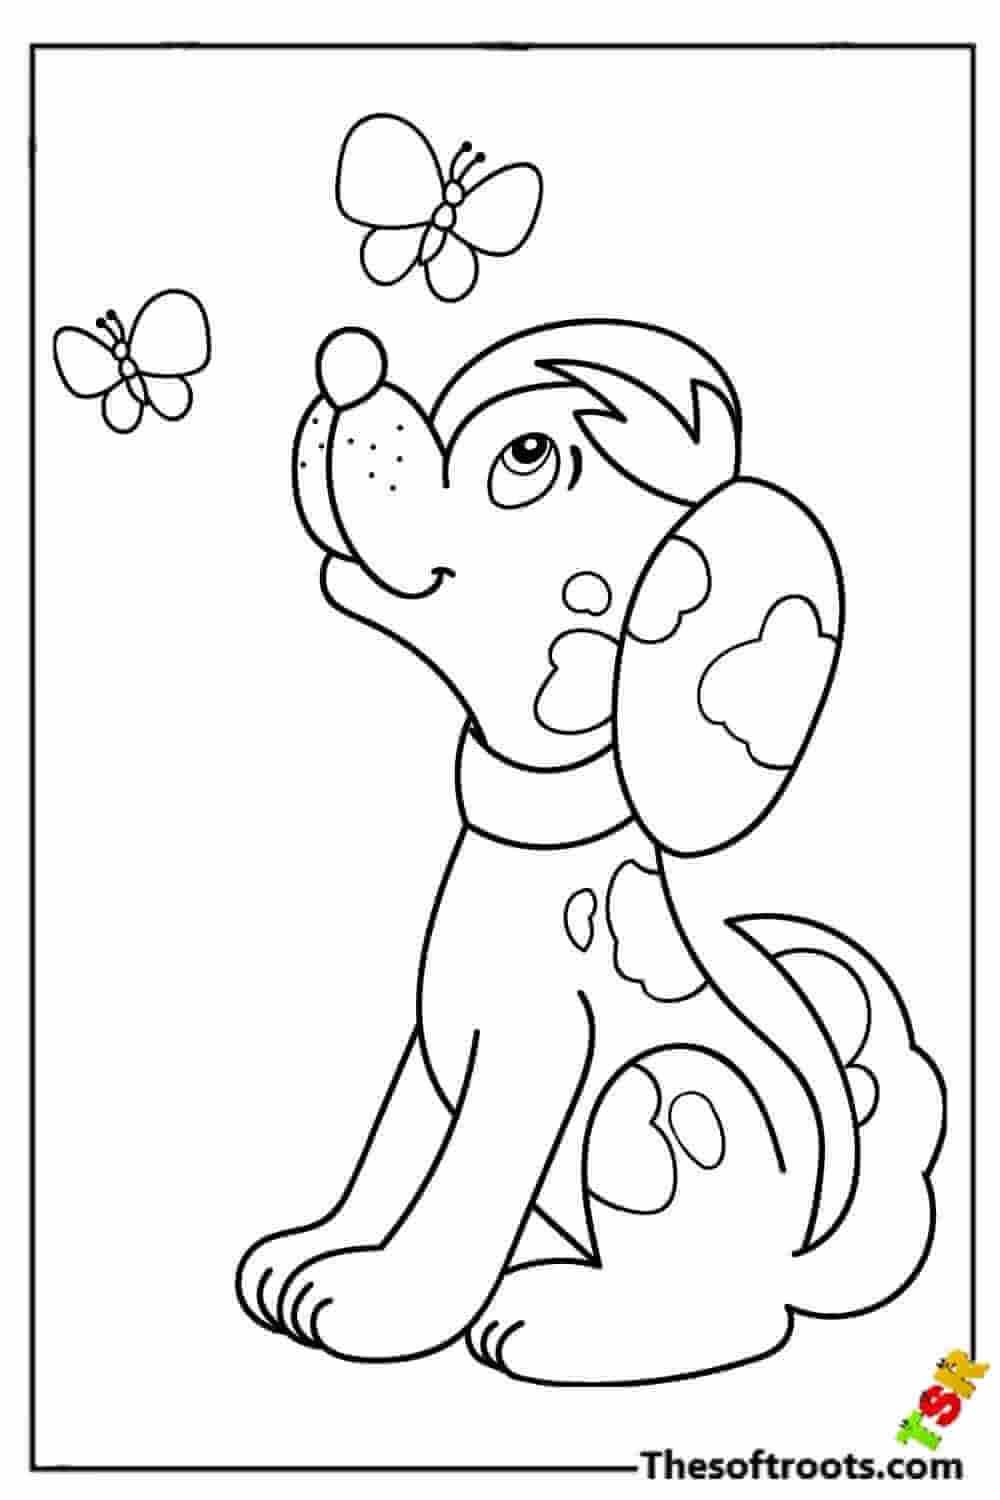 Cartoon puppy coloring pages